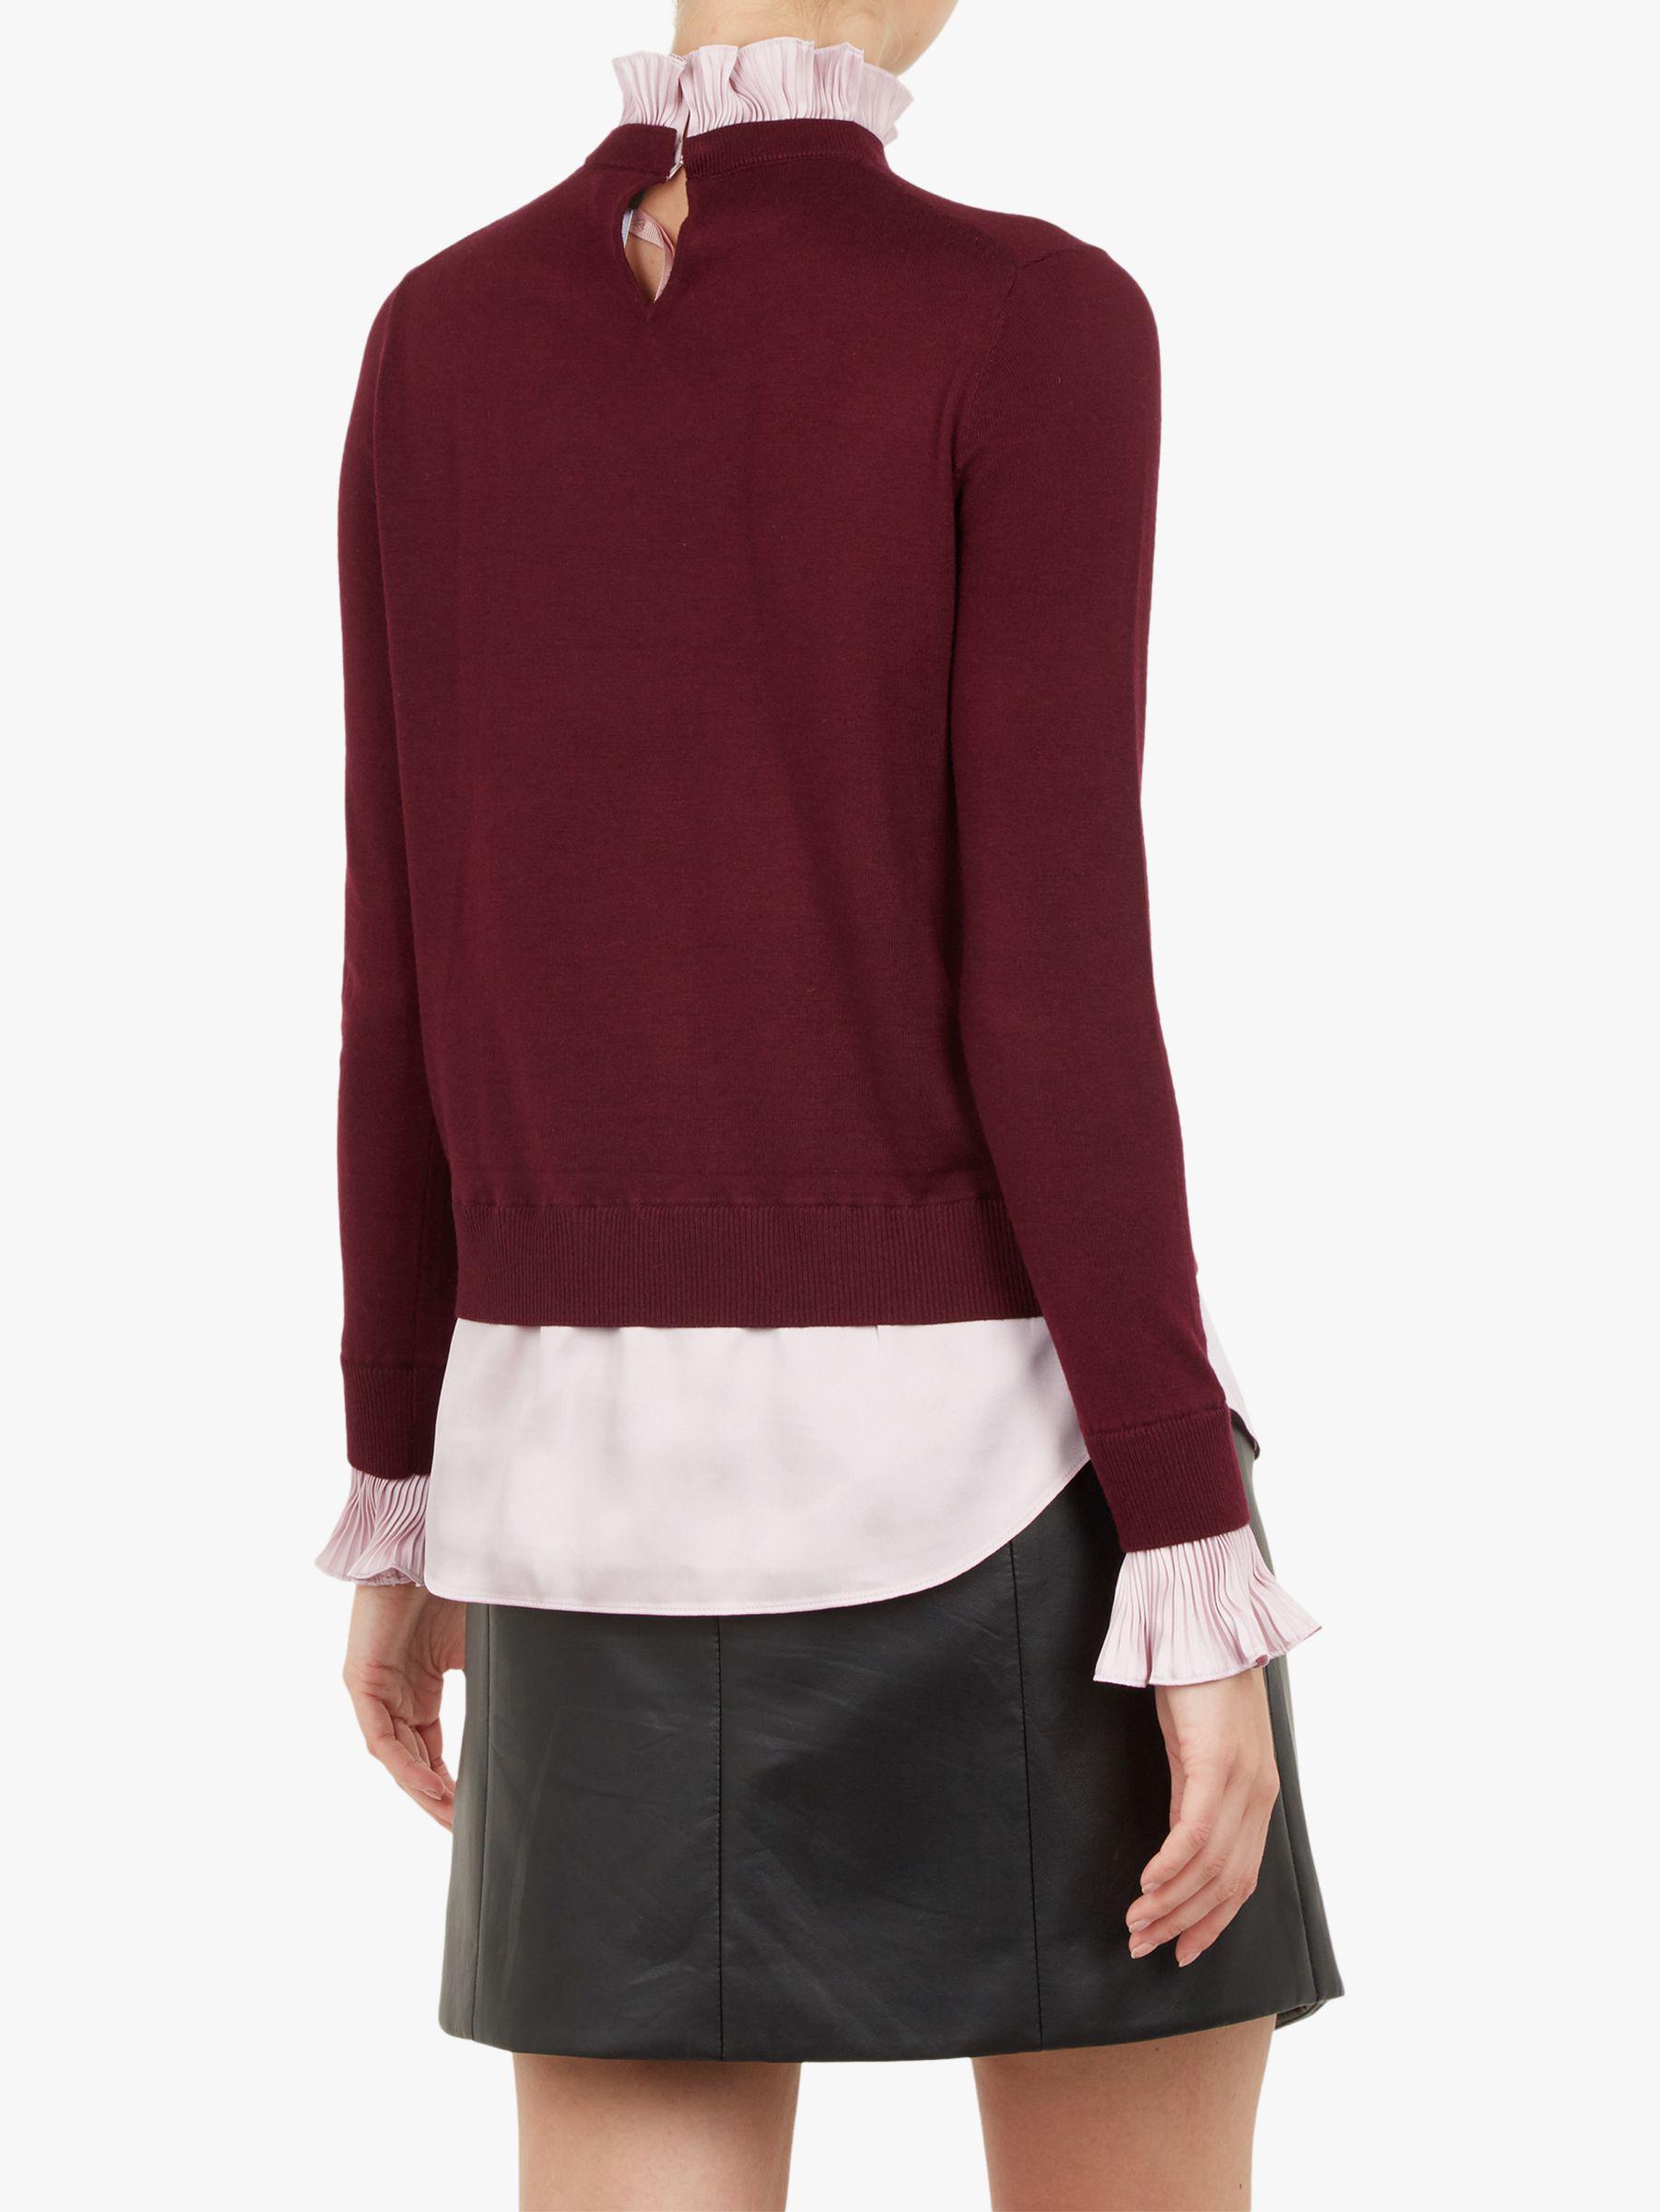 Ted Baker Cashmere Kaarina Frill Collar Jumper in Red Bordeaux (Red) - Lyst